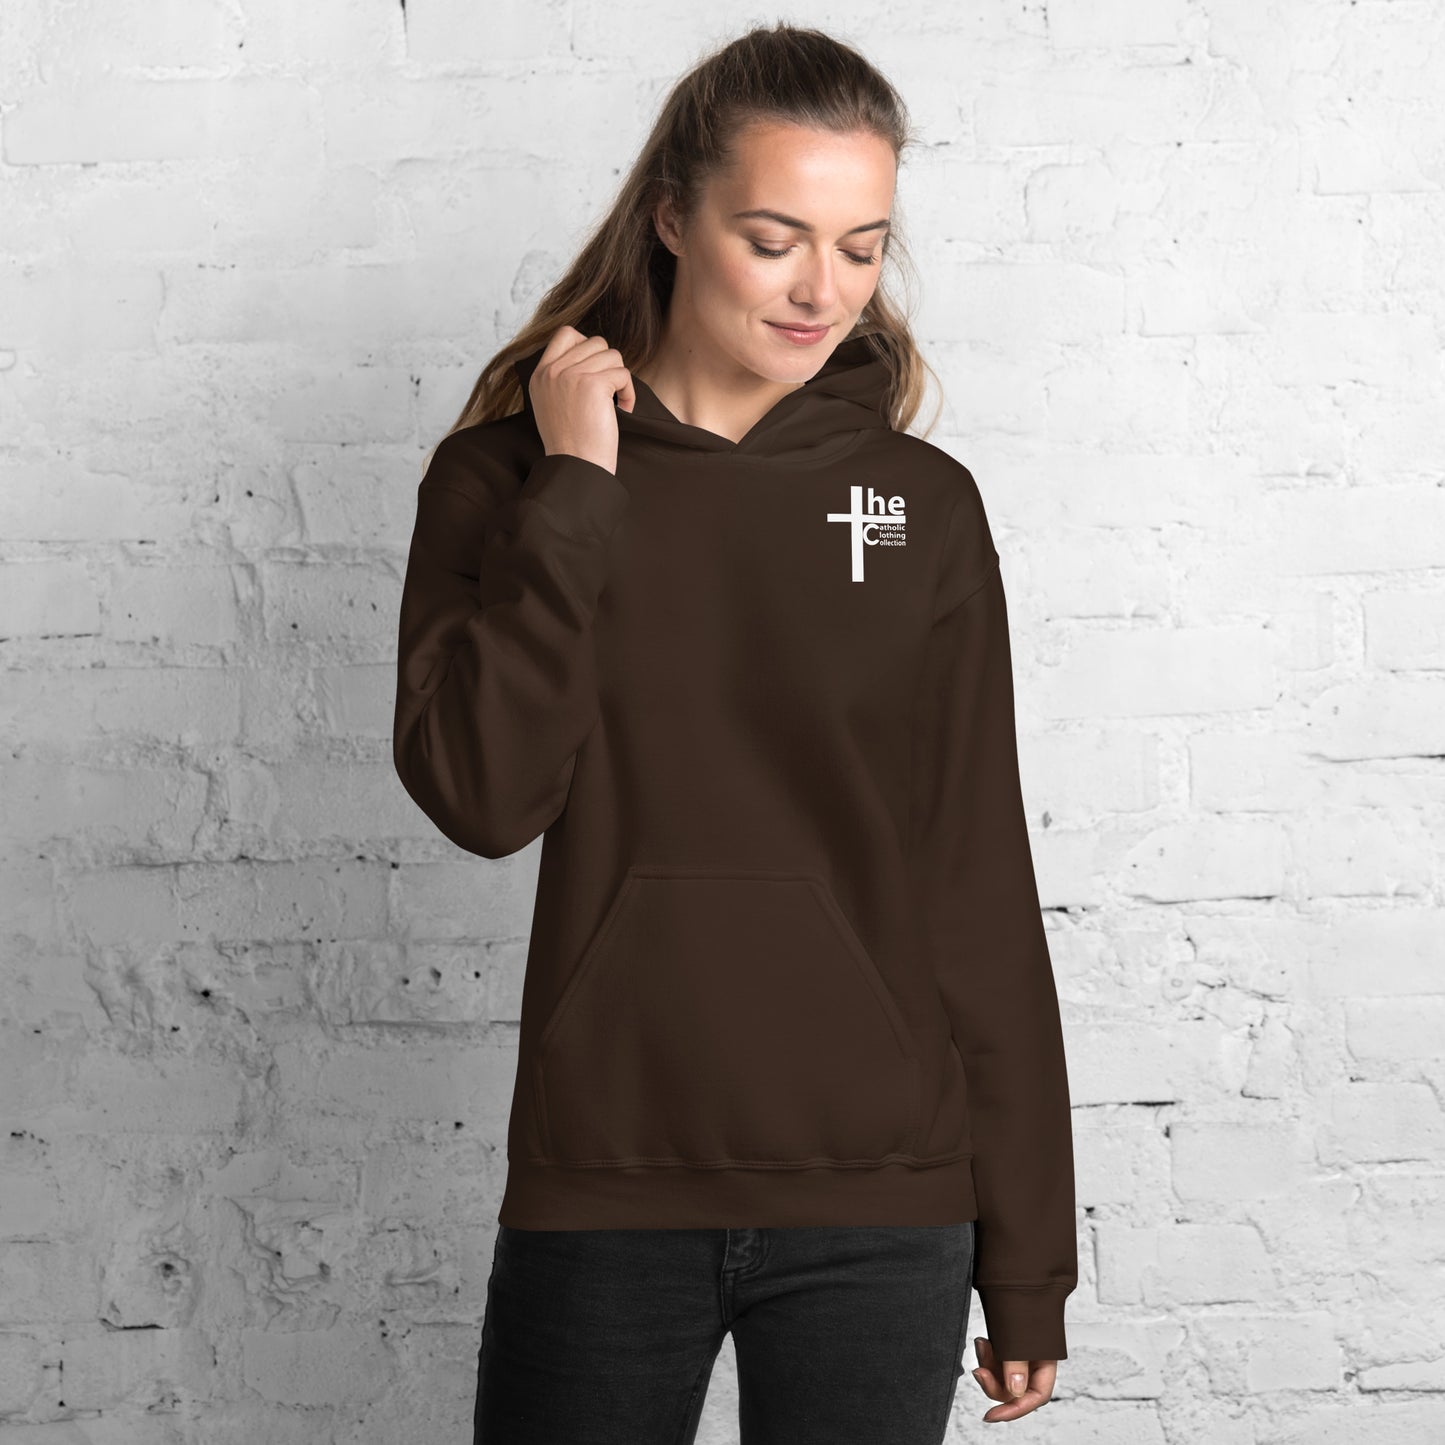 I Came, I Saw, God Conquered! Women's Hoodie